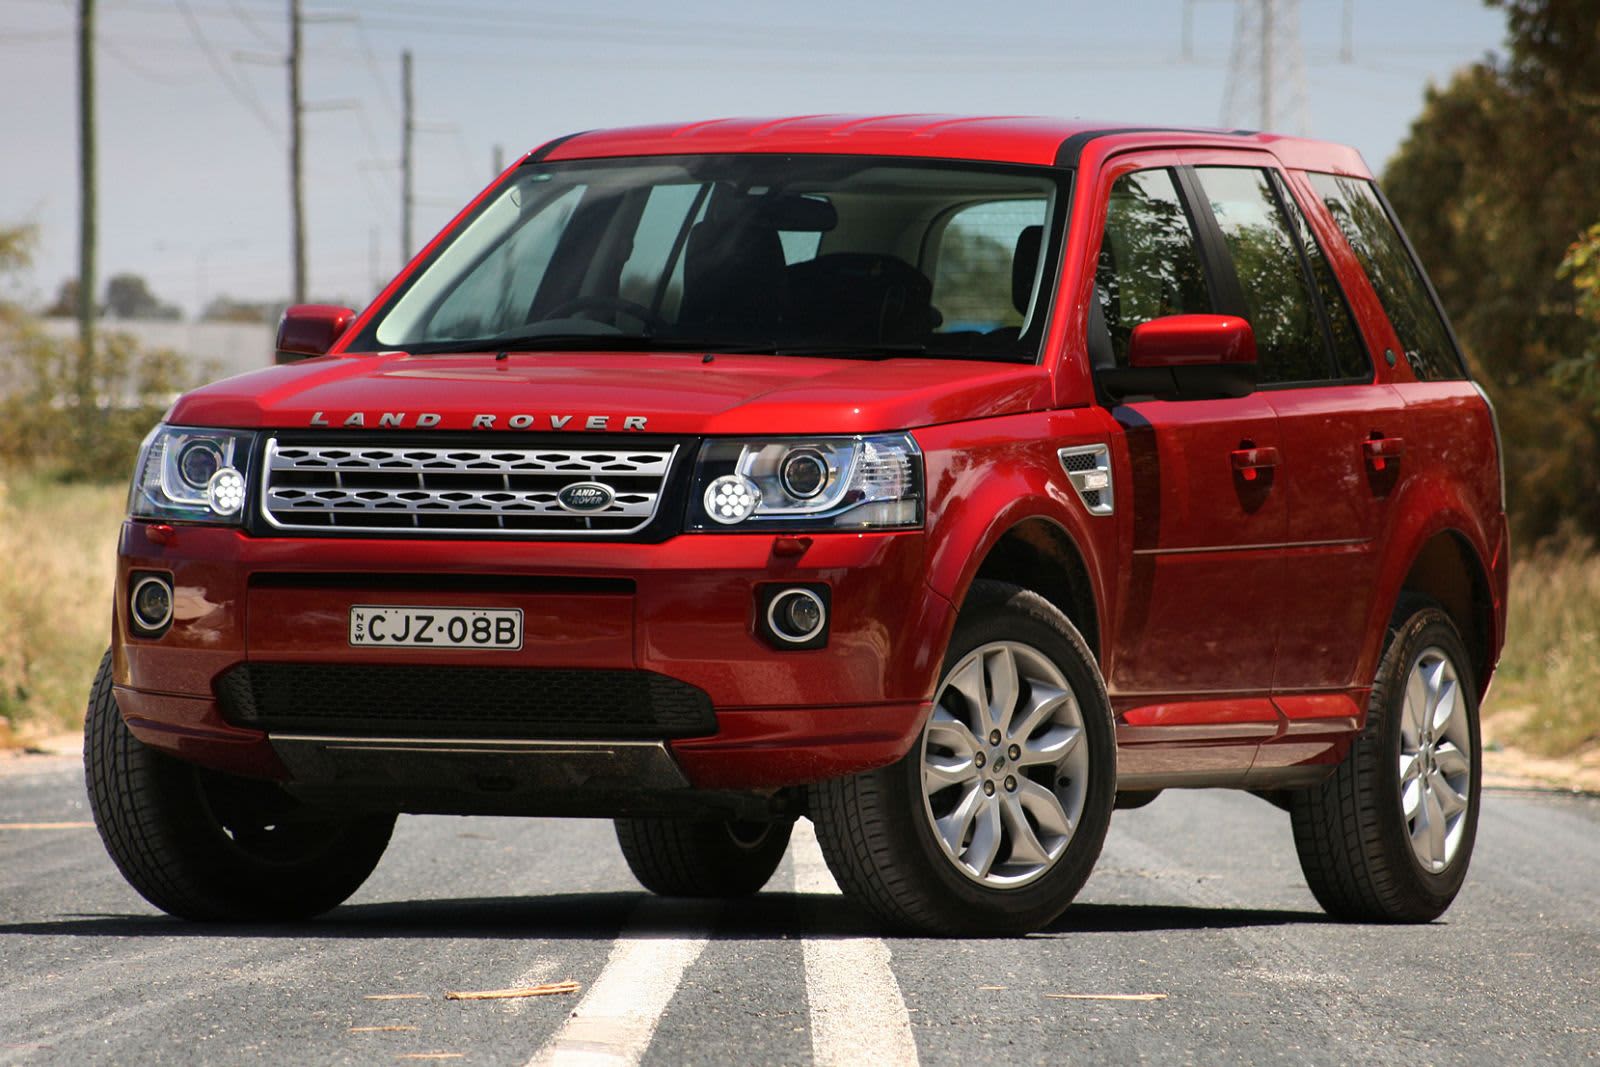 Land Rover Freelander Review | 2013 Si4 SE On- And Off-Road